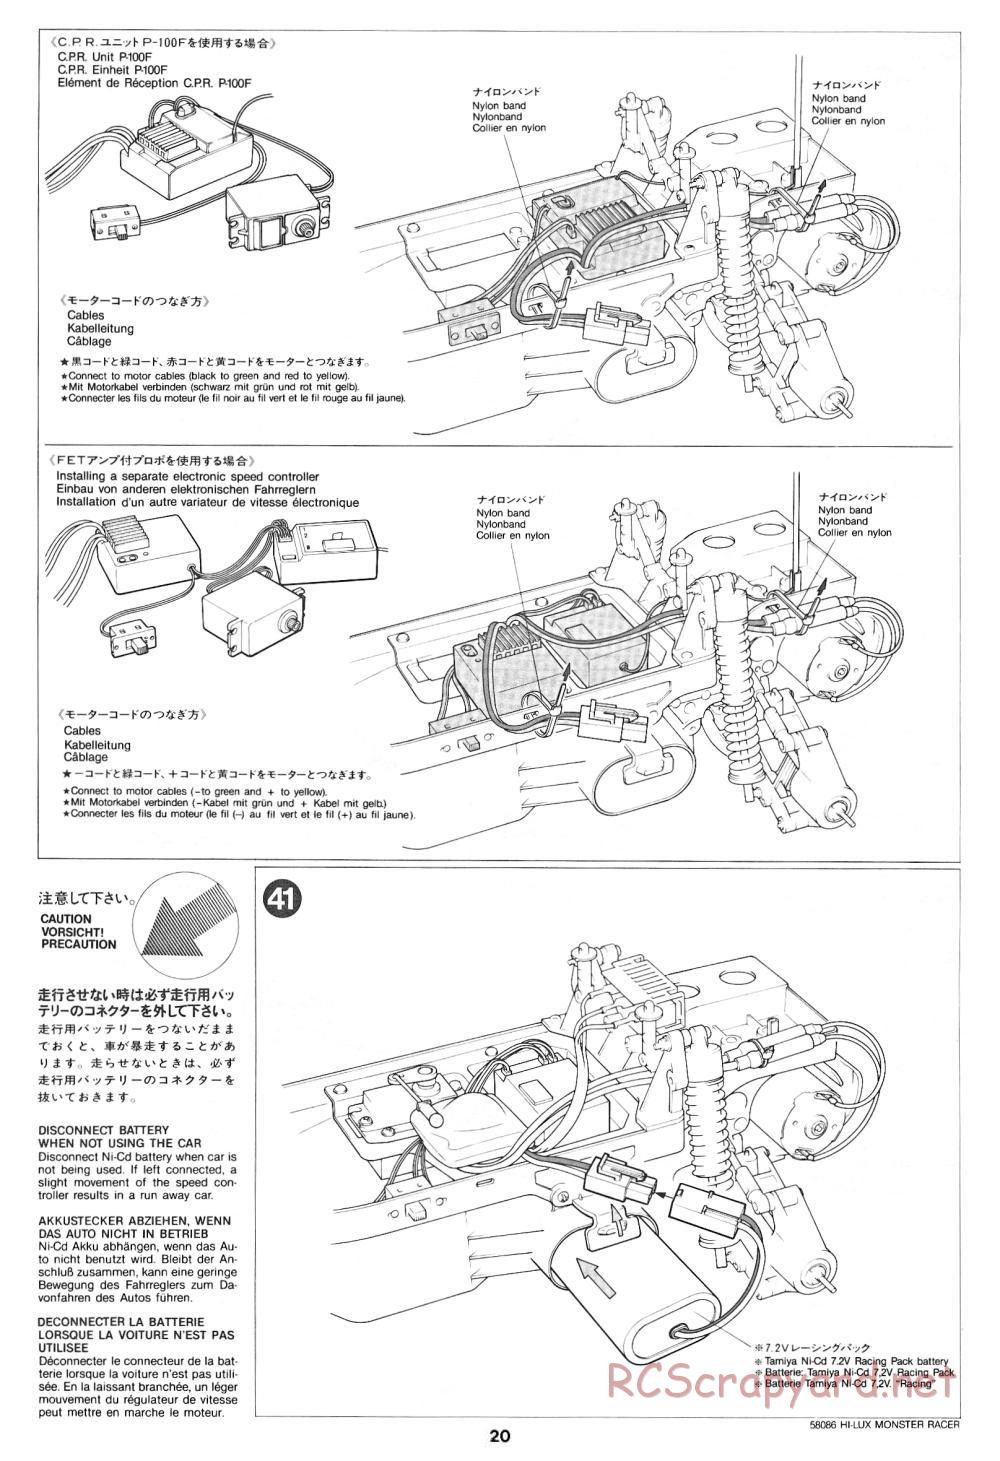 Tamiya - Toyota Hilux Monster Racer - 58086 - Manual - Page 20